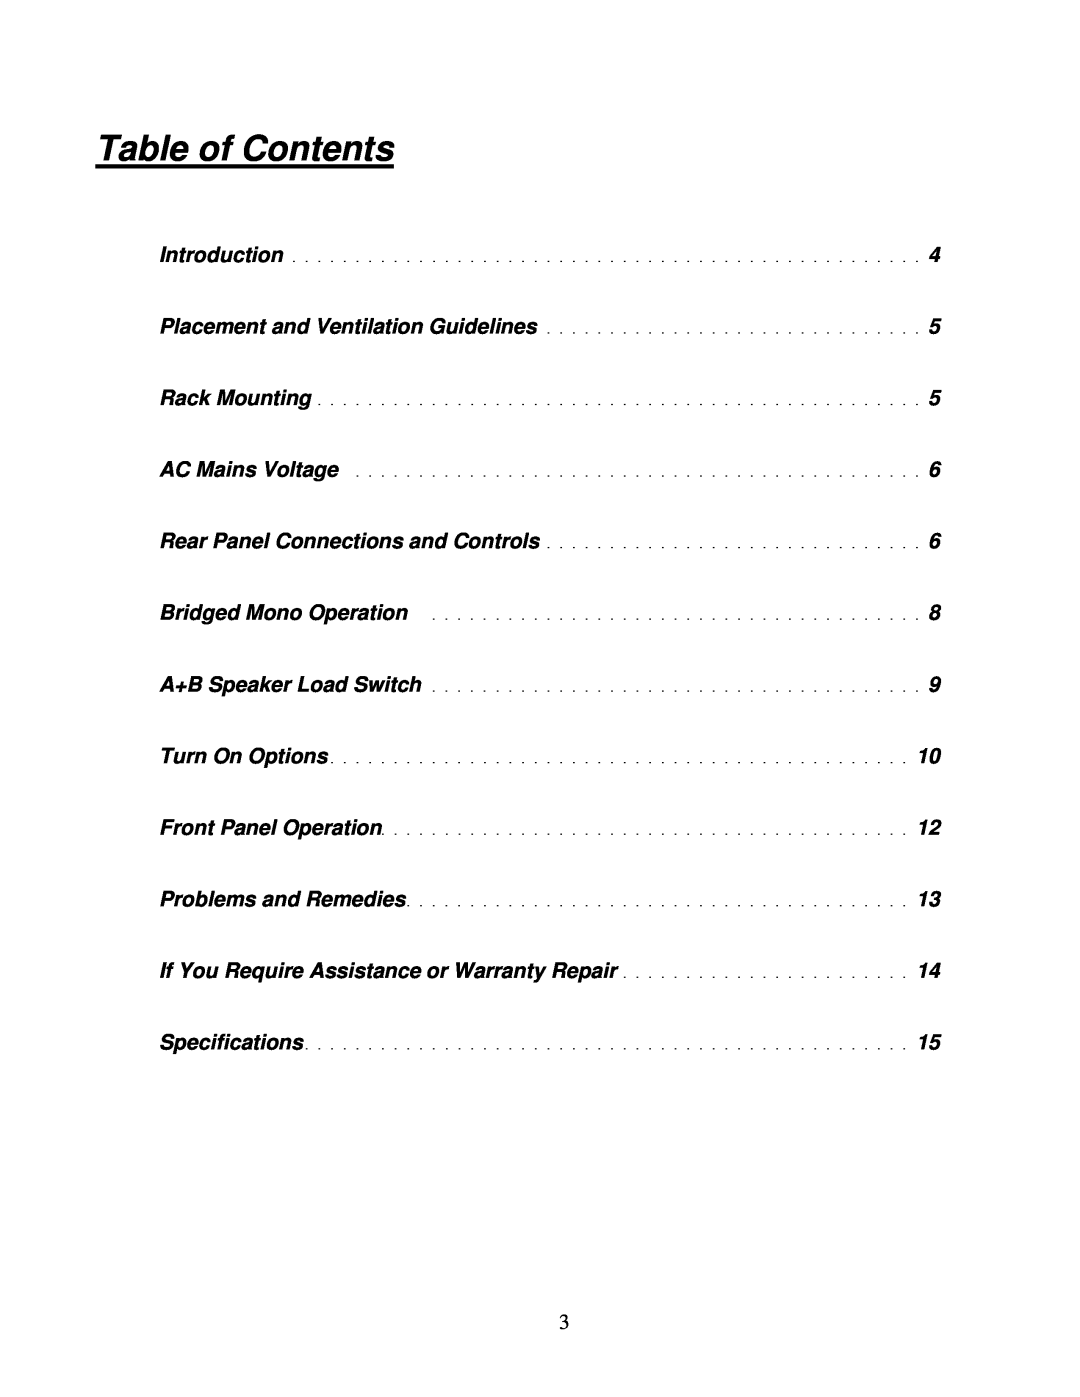 Parasound 2125 V.2 manual Table of Contents 